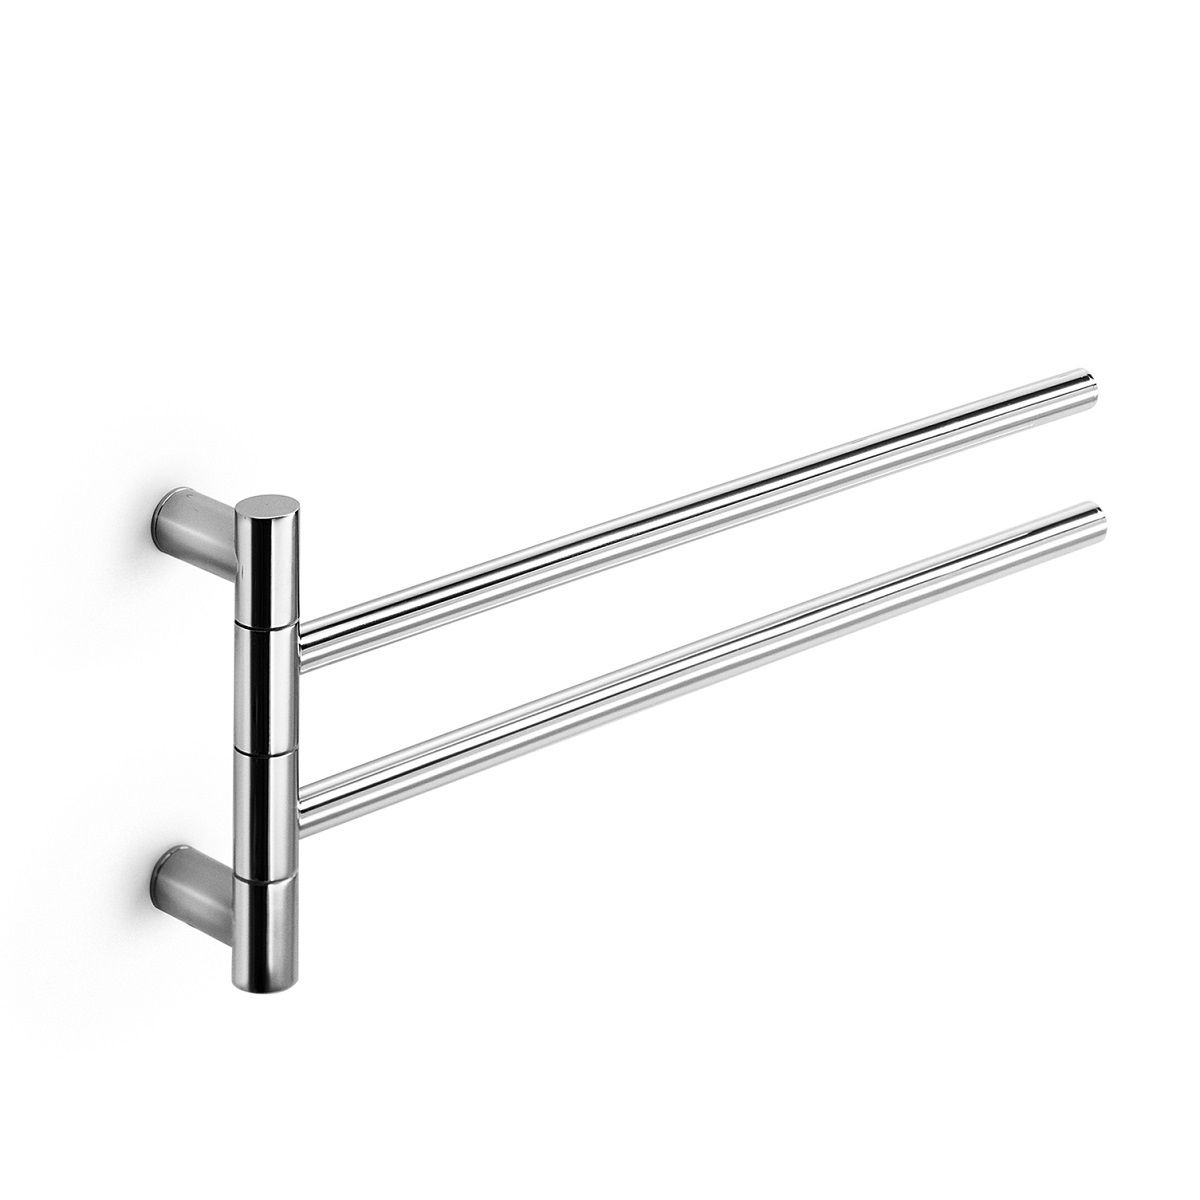 Towel Bars for Display and Function - Double Towel Bar